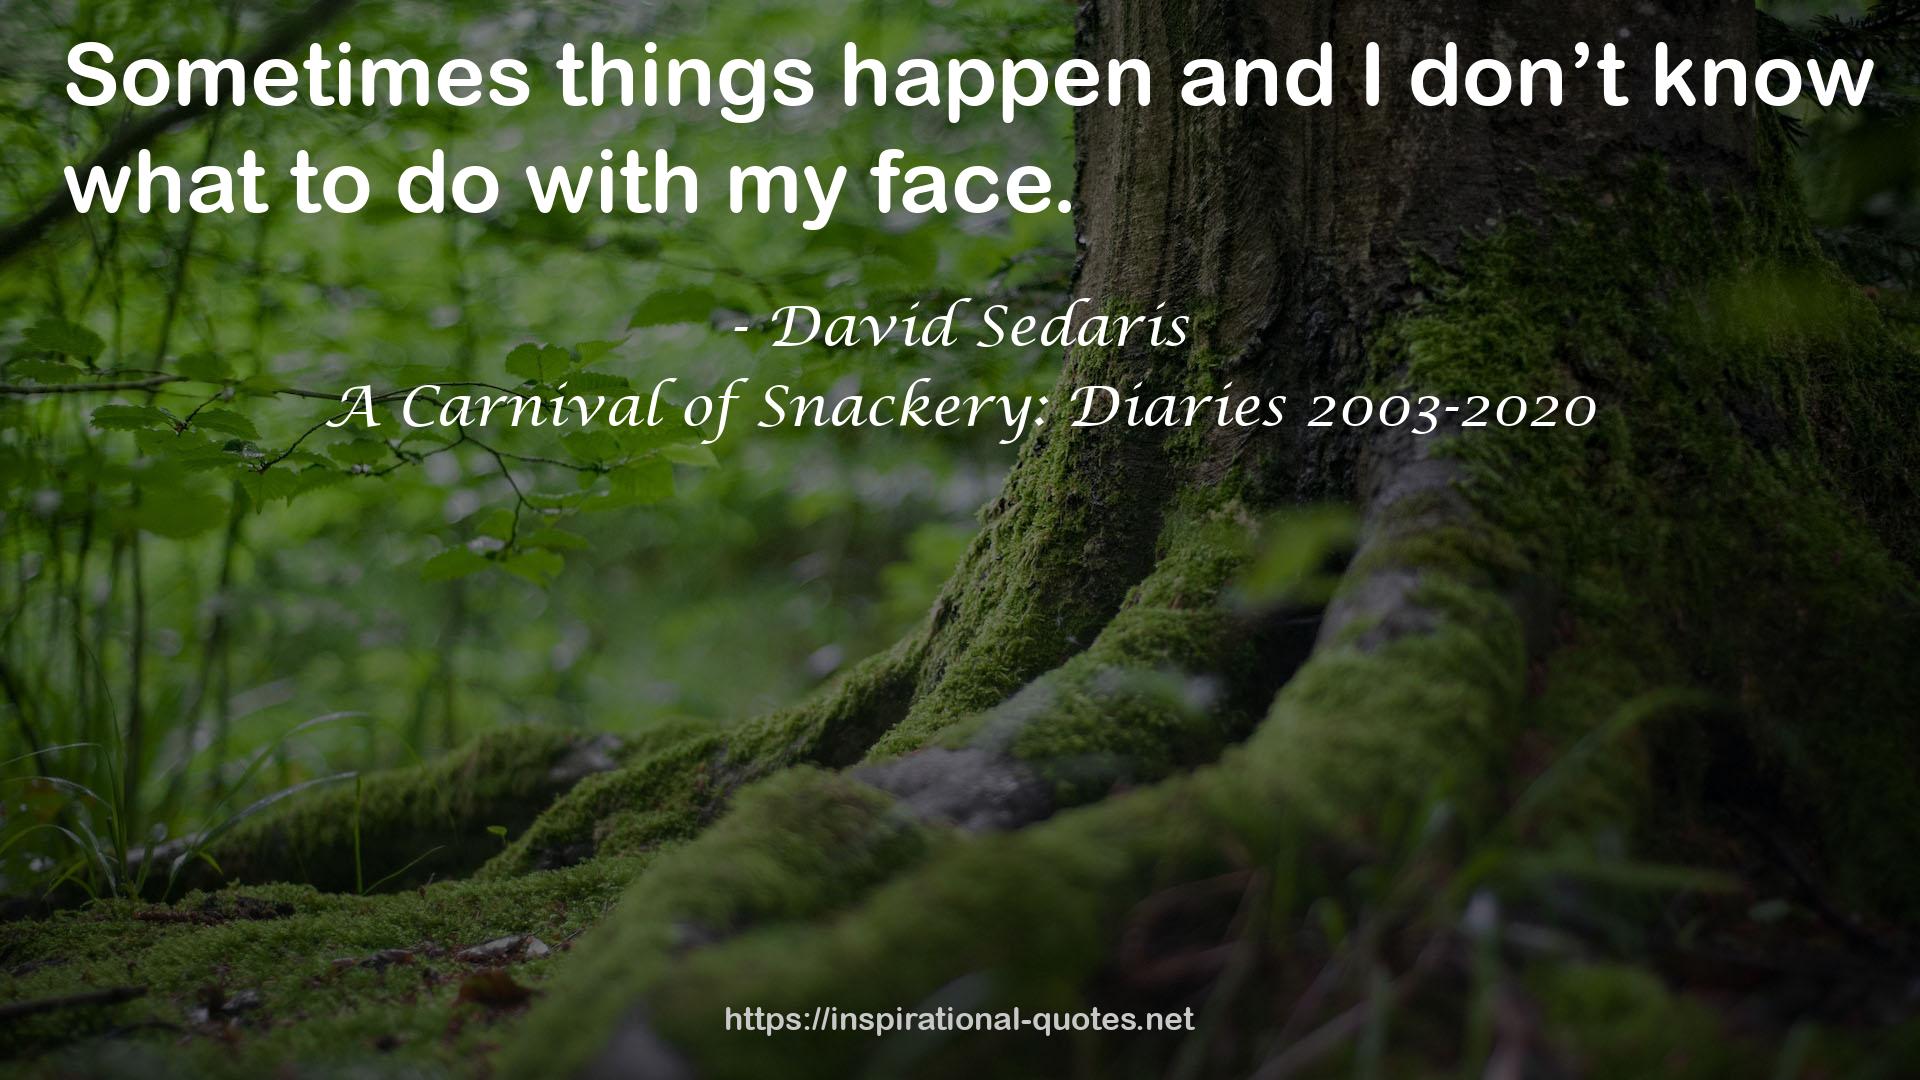 A Carnival of Snackery: Diaries 2003-2020 QUOTES